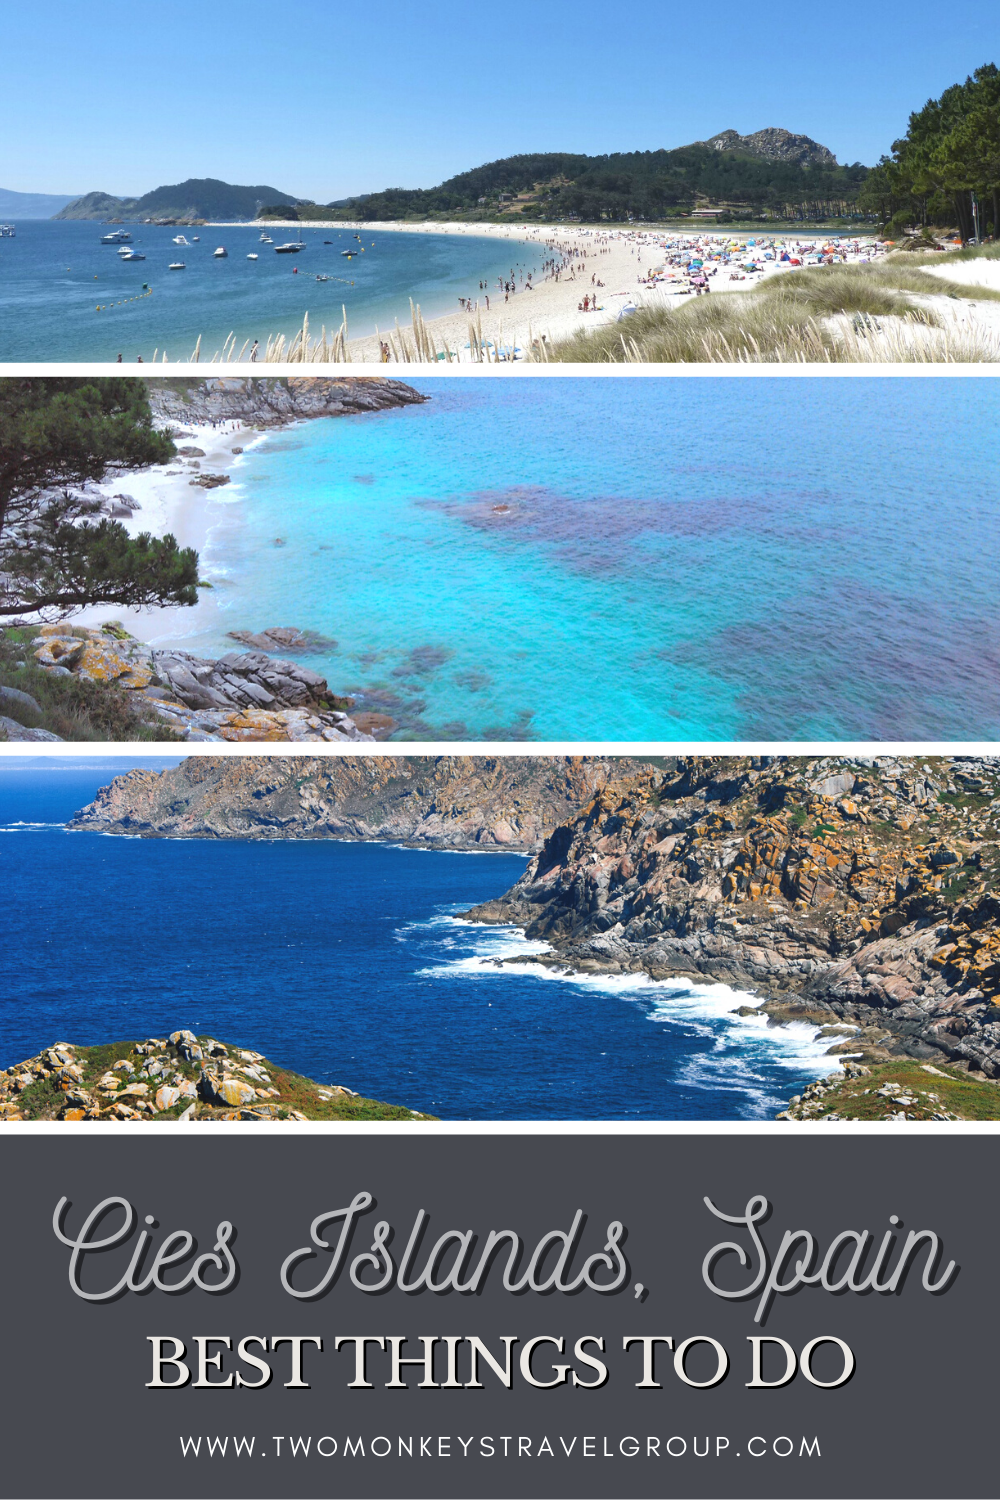 5 Best Things to do in Cies Islands, Spain [with Suggested Tours]